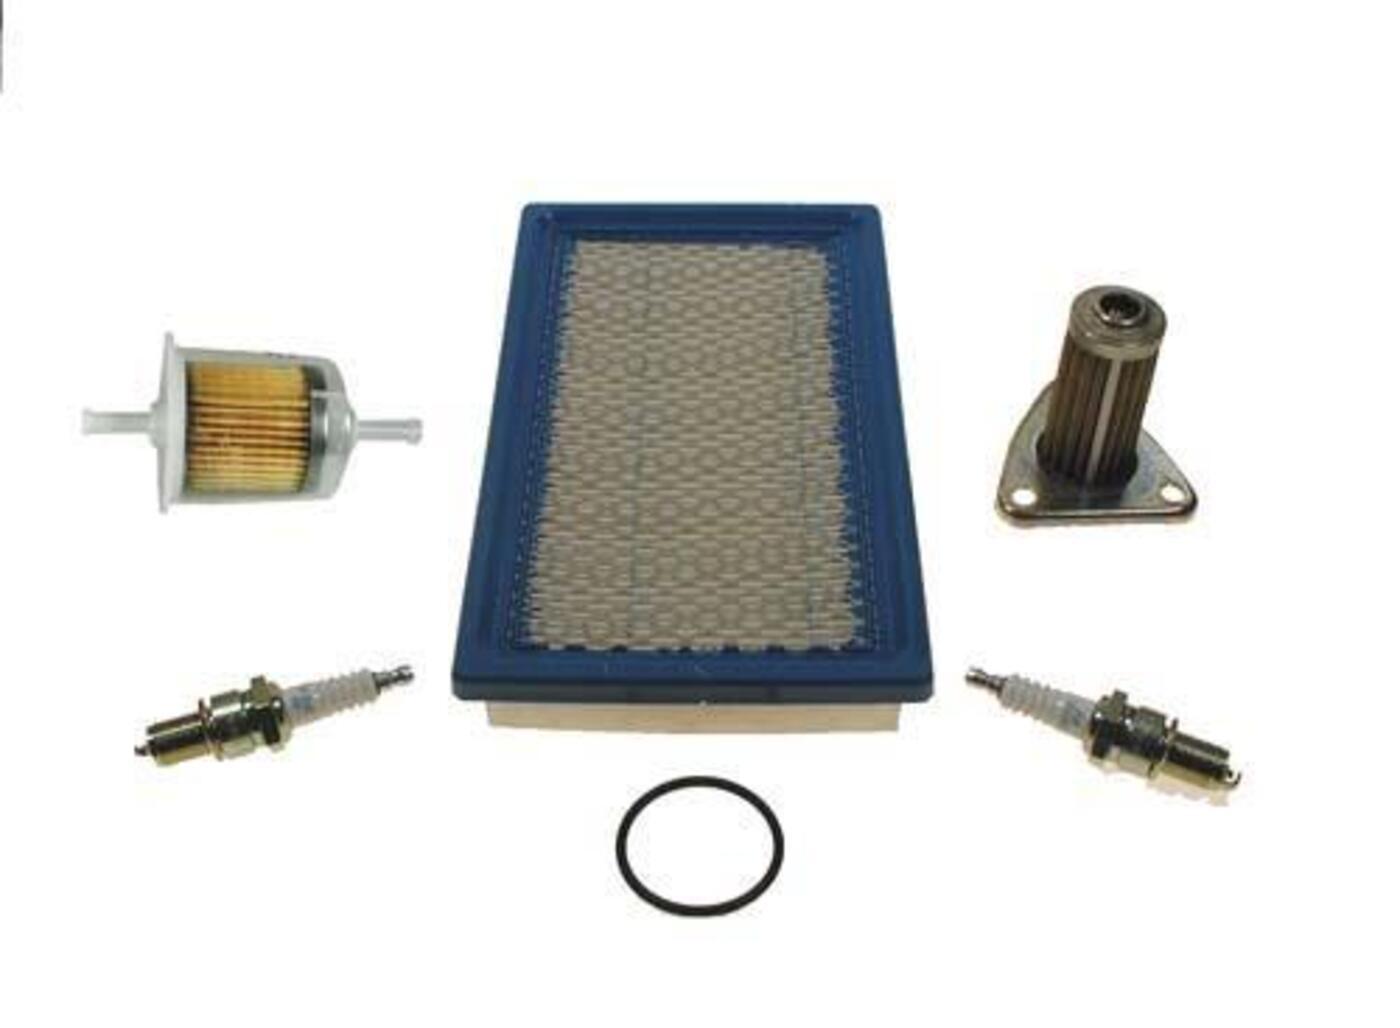 E-Z-GO Deluxe 4-Cycle Tune Up Kit w/ Oil Filter (Years 1991-1994)